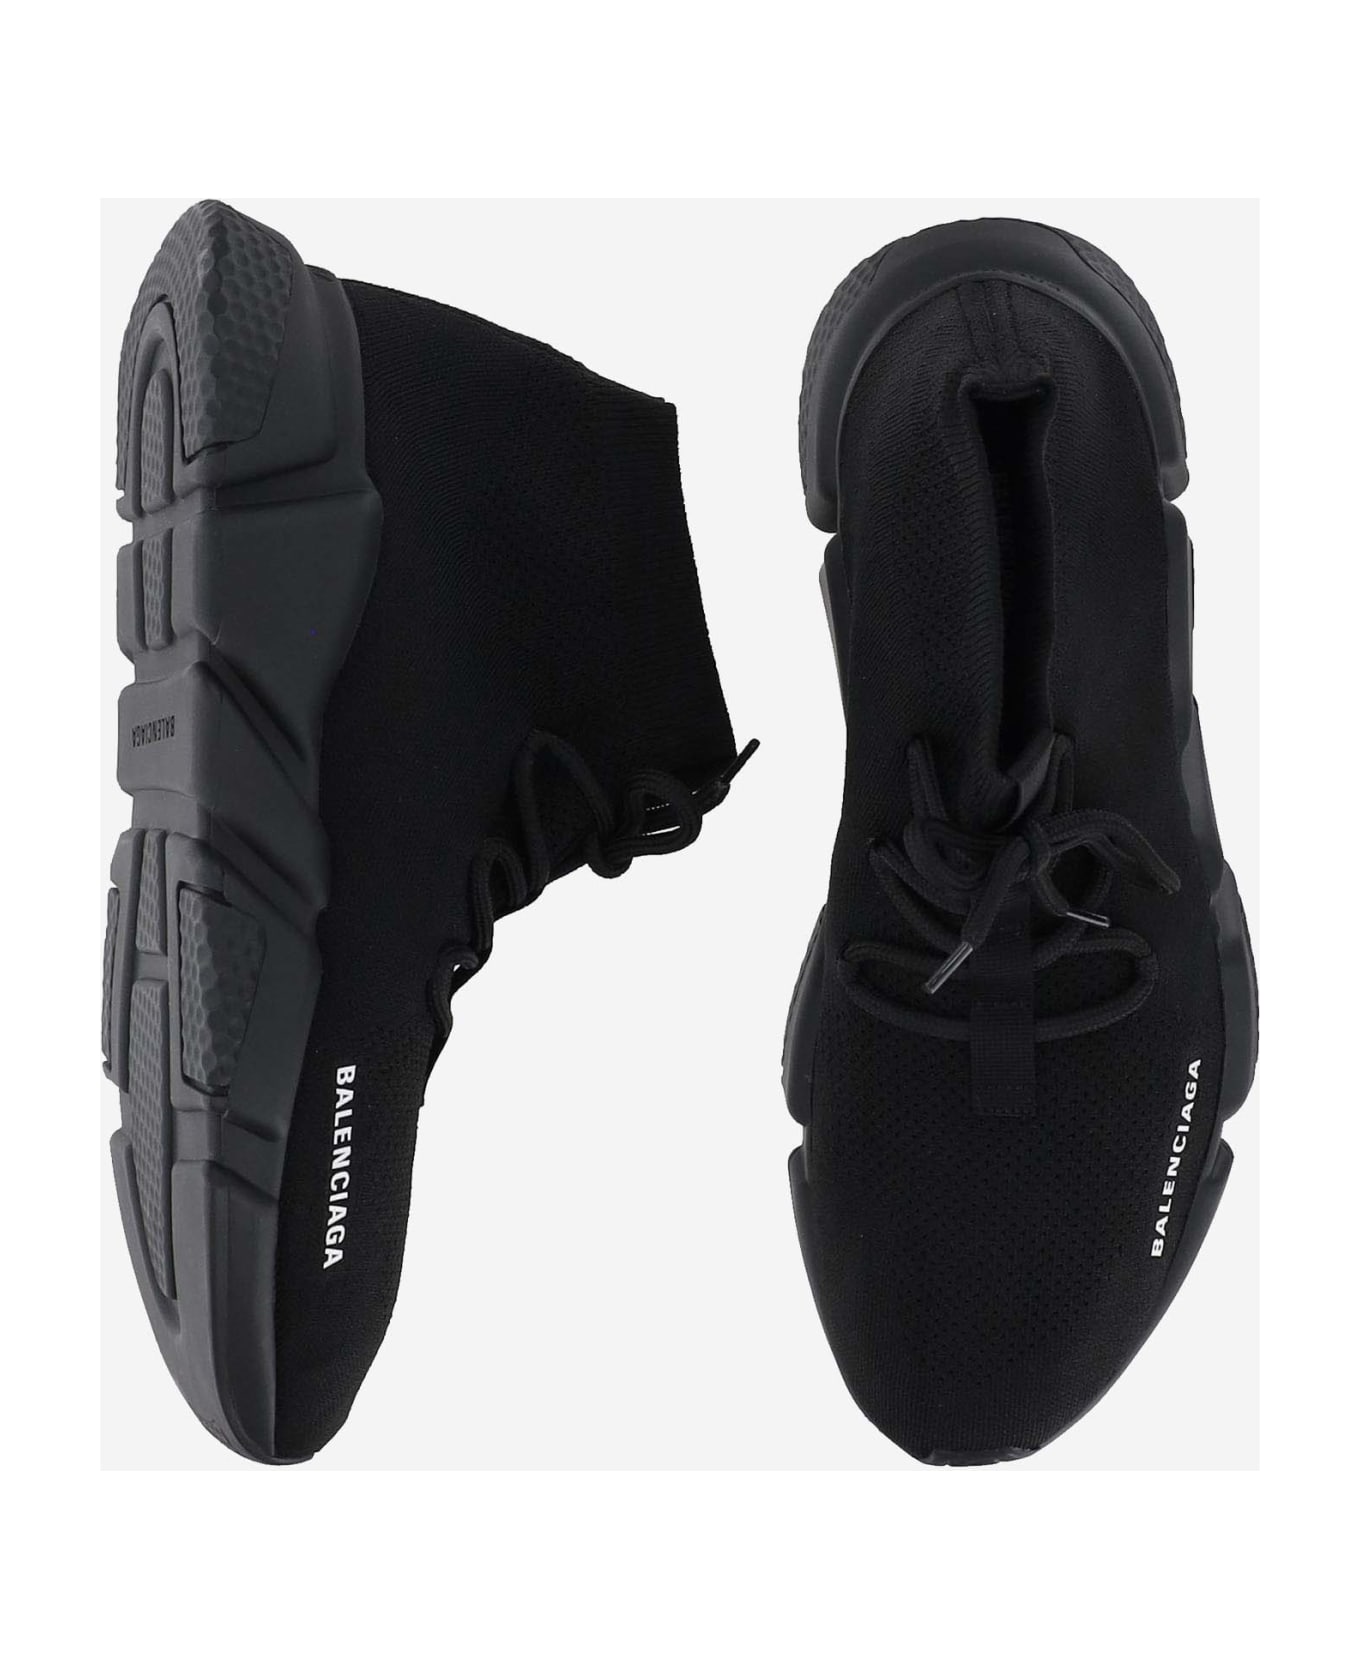 Balenciaga Recycled Mesh Speed Lace-up Sneaker - Black